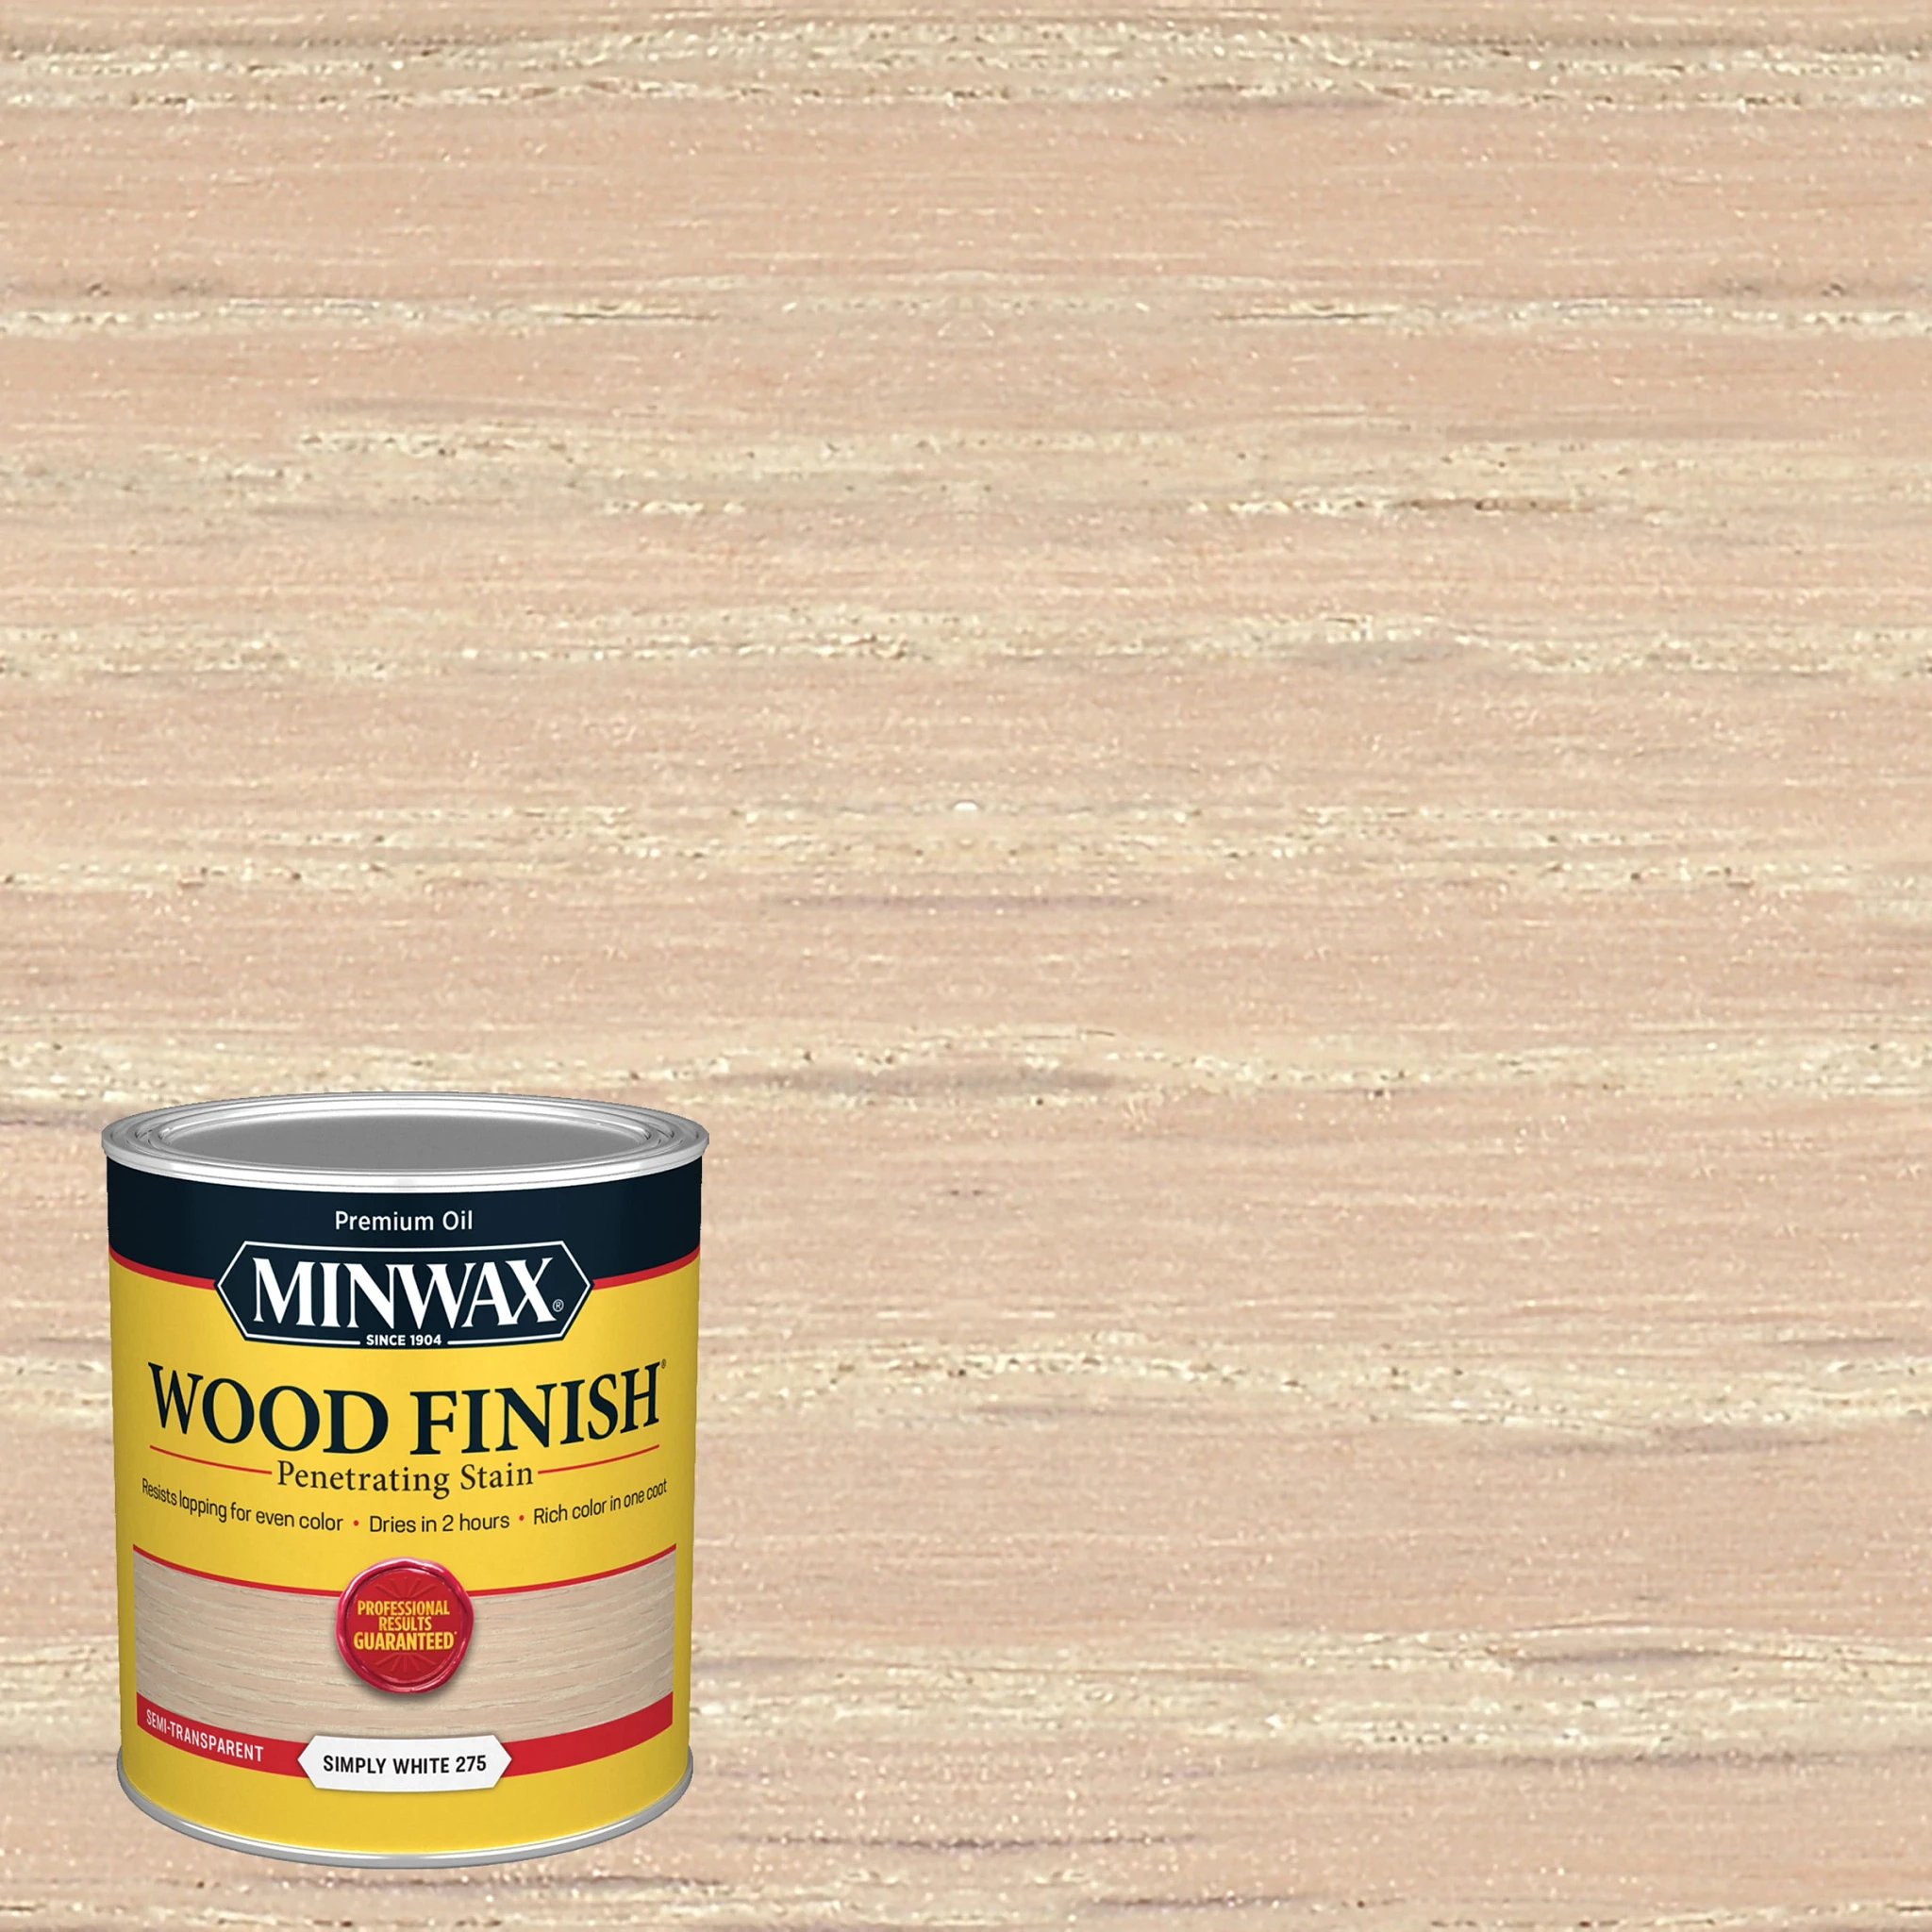 Wood Finish Oil Based InteriorWoodStain SIMPLY WHITE